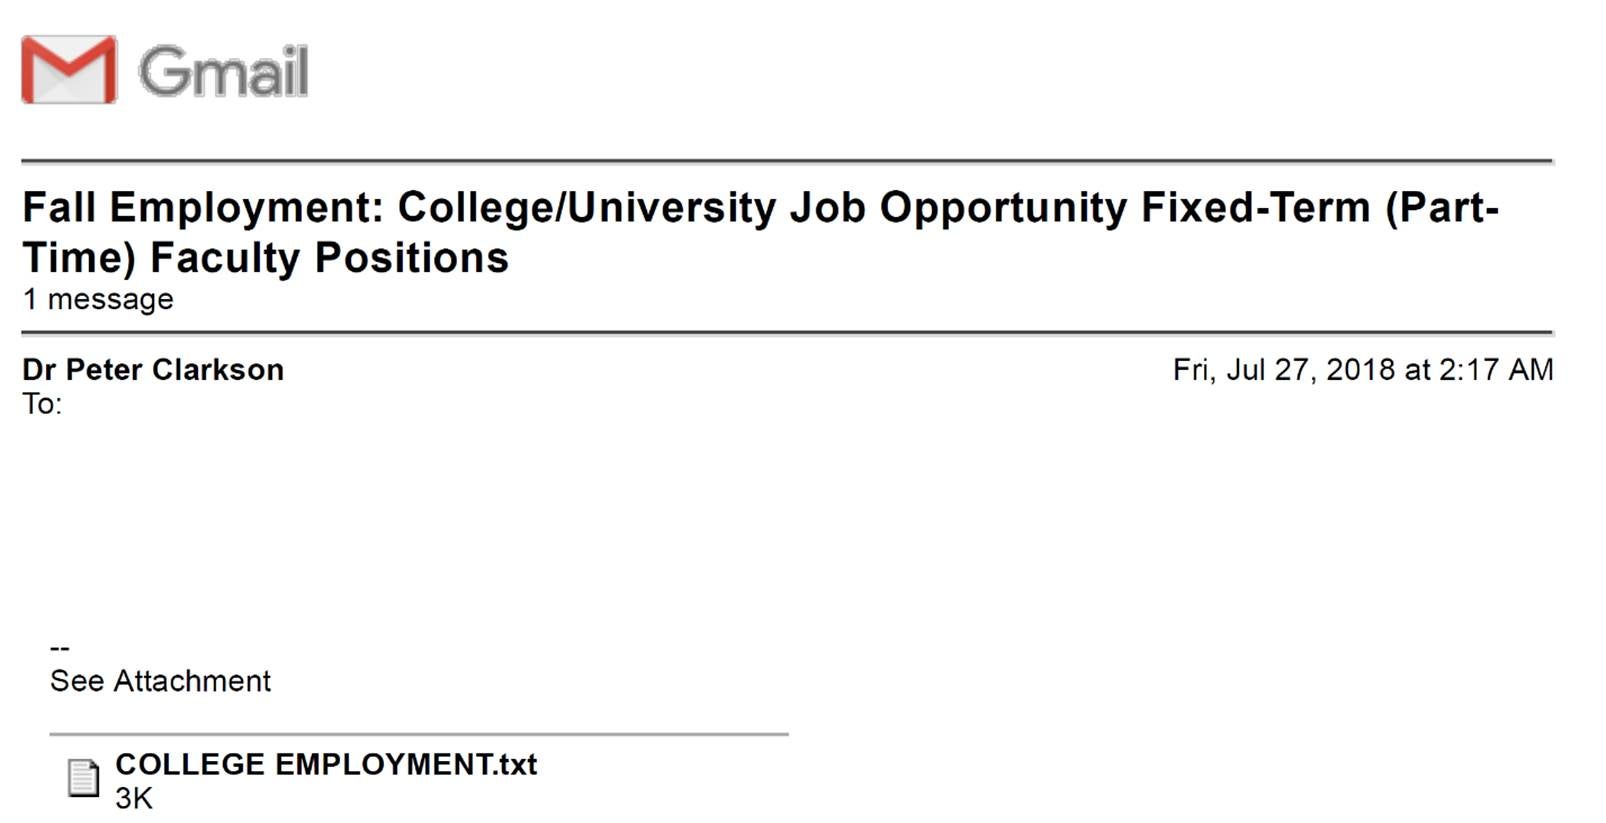 Gmail image with text Fall Employment: College/University Job Opportunity Fixed-Term (Part-Time) Faculty Positions